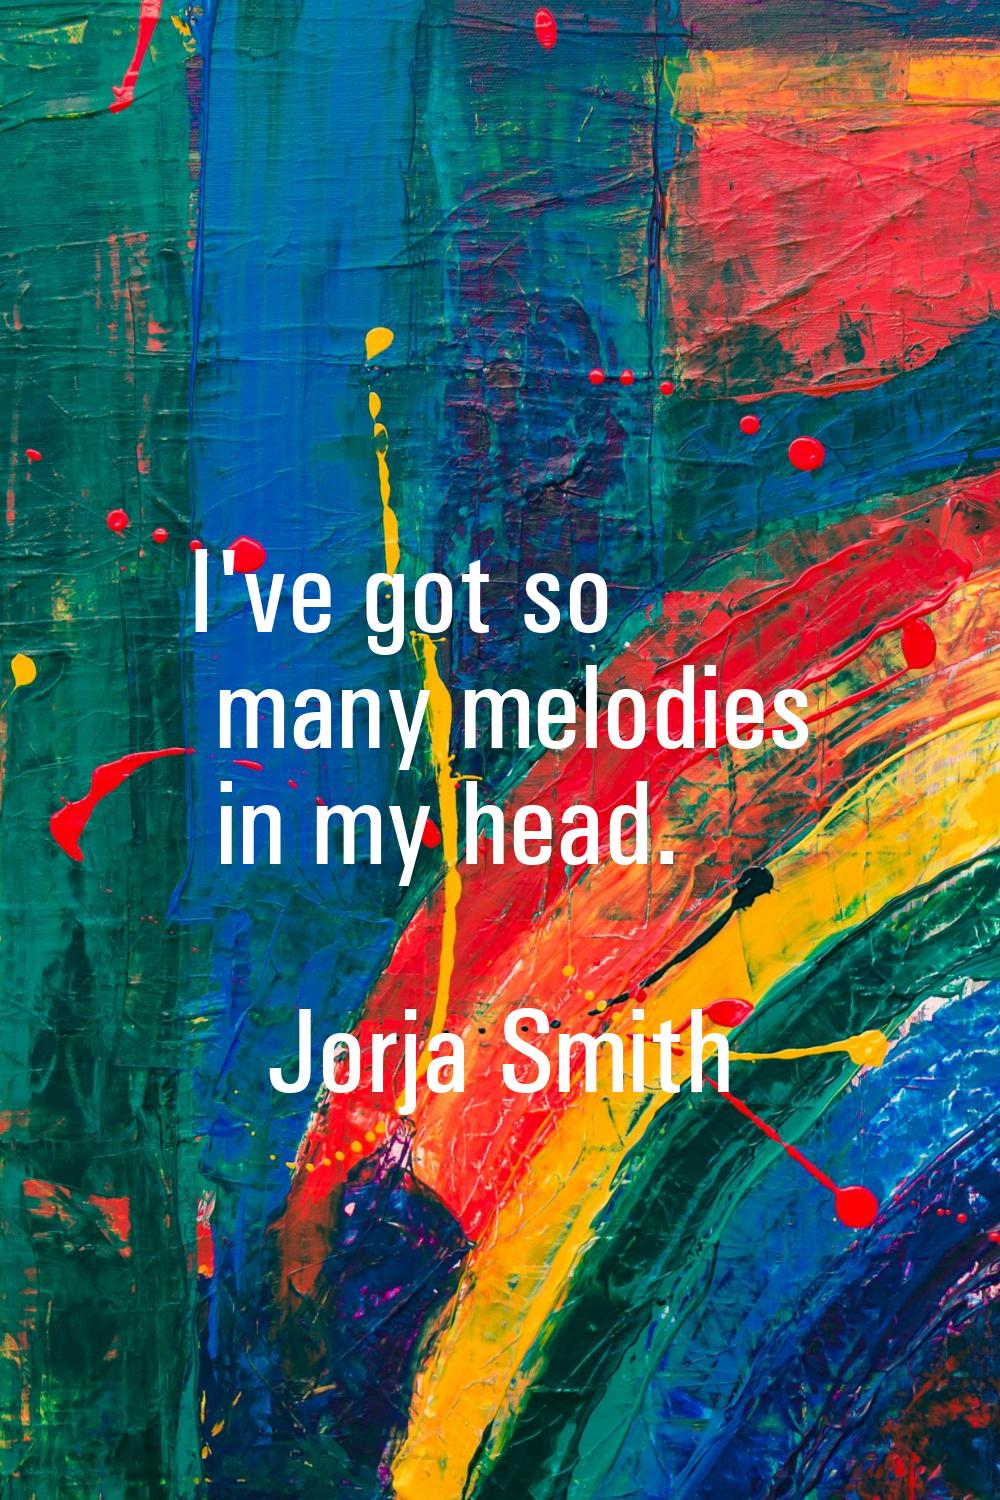 I've got so many melodies in my head.